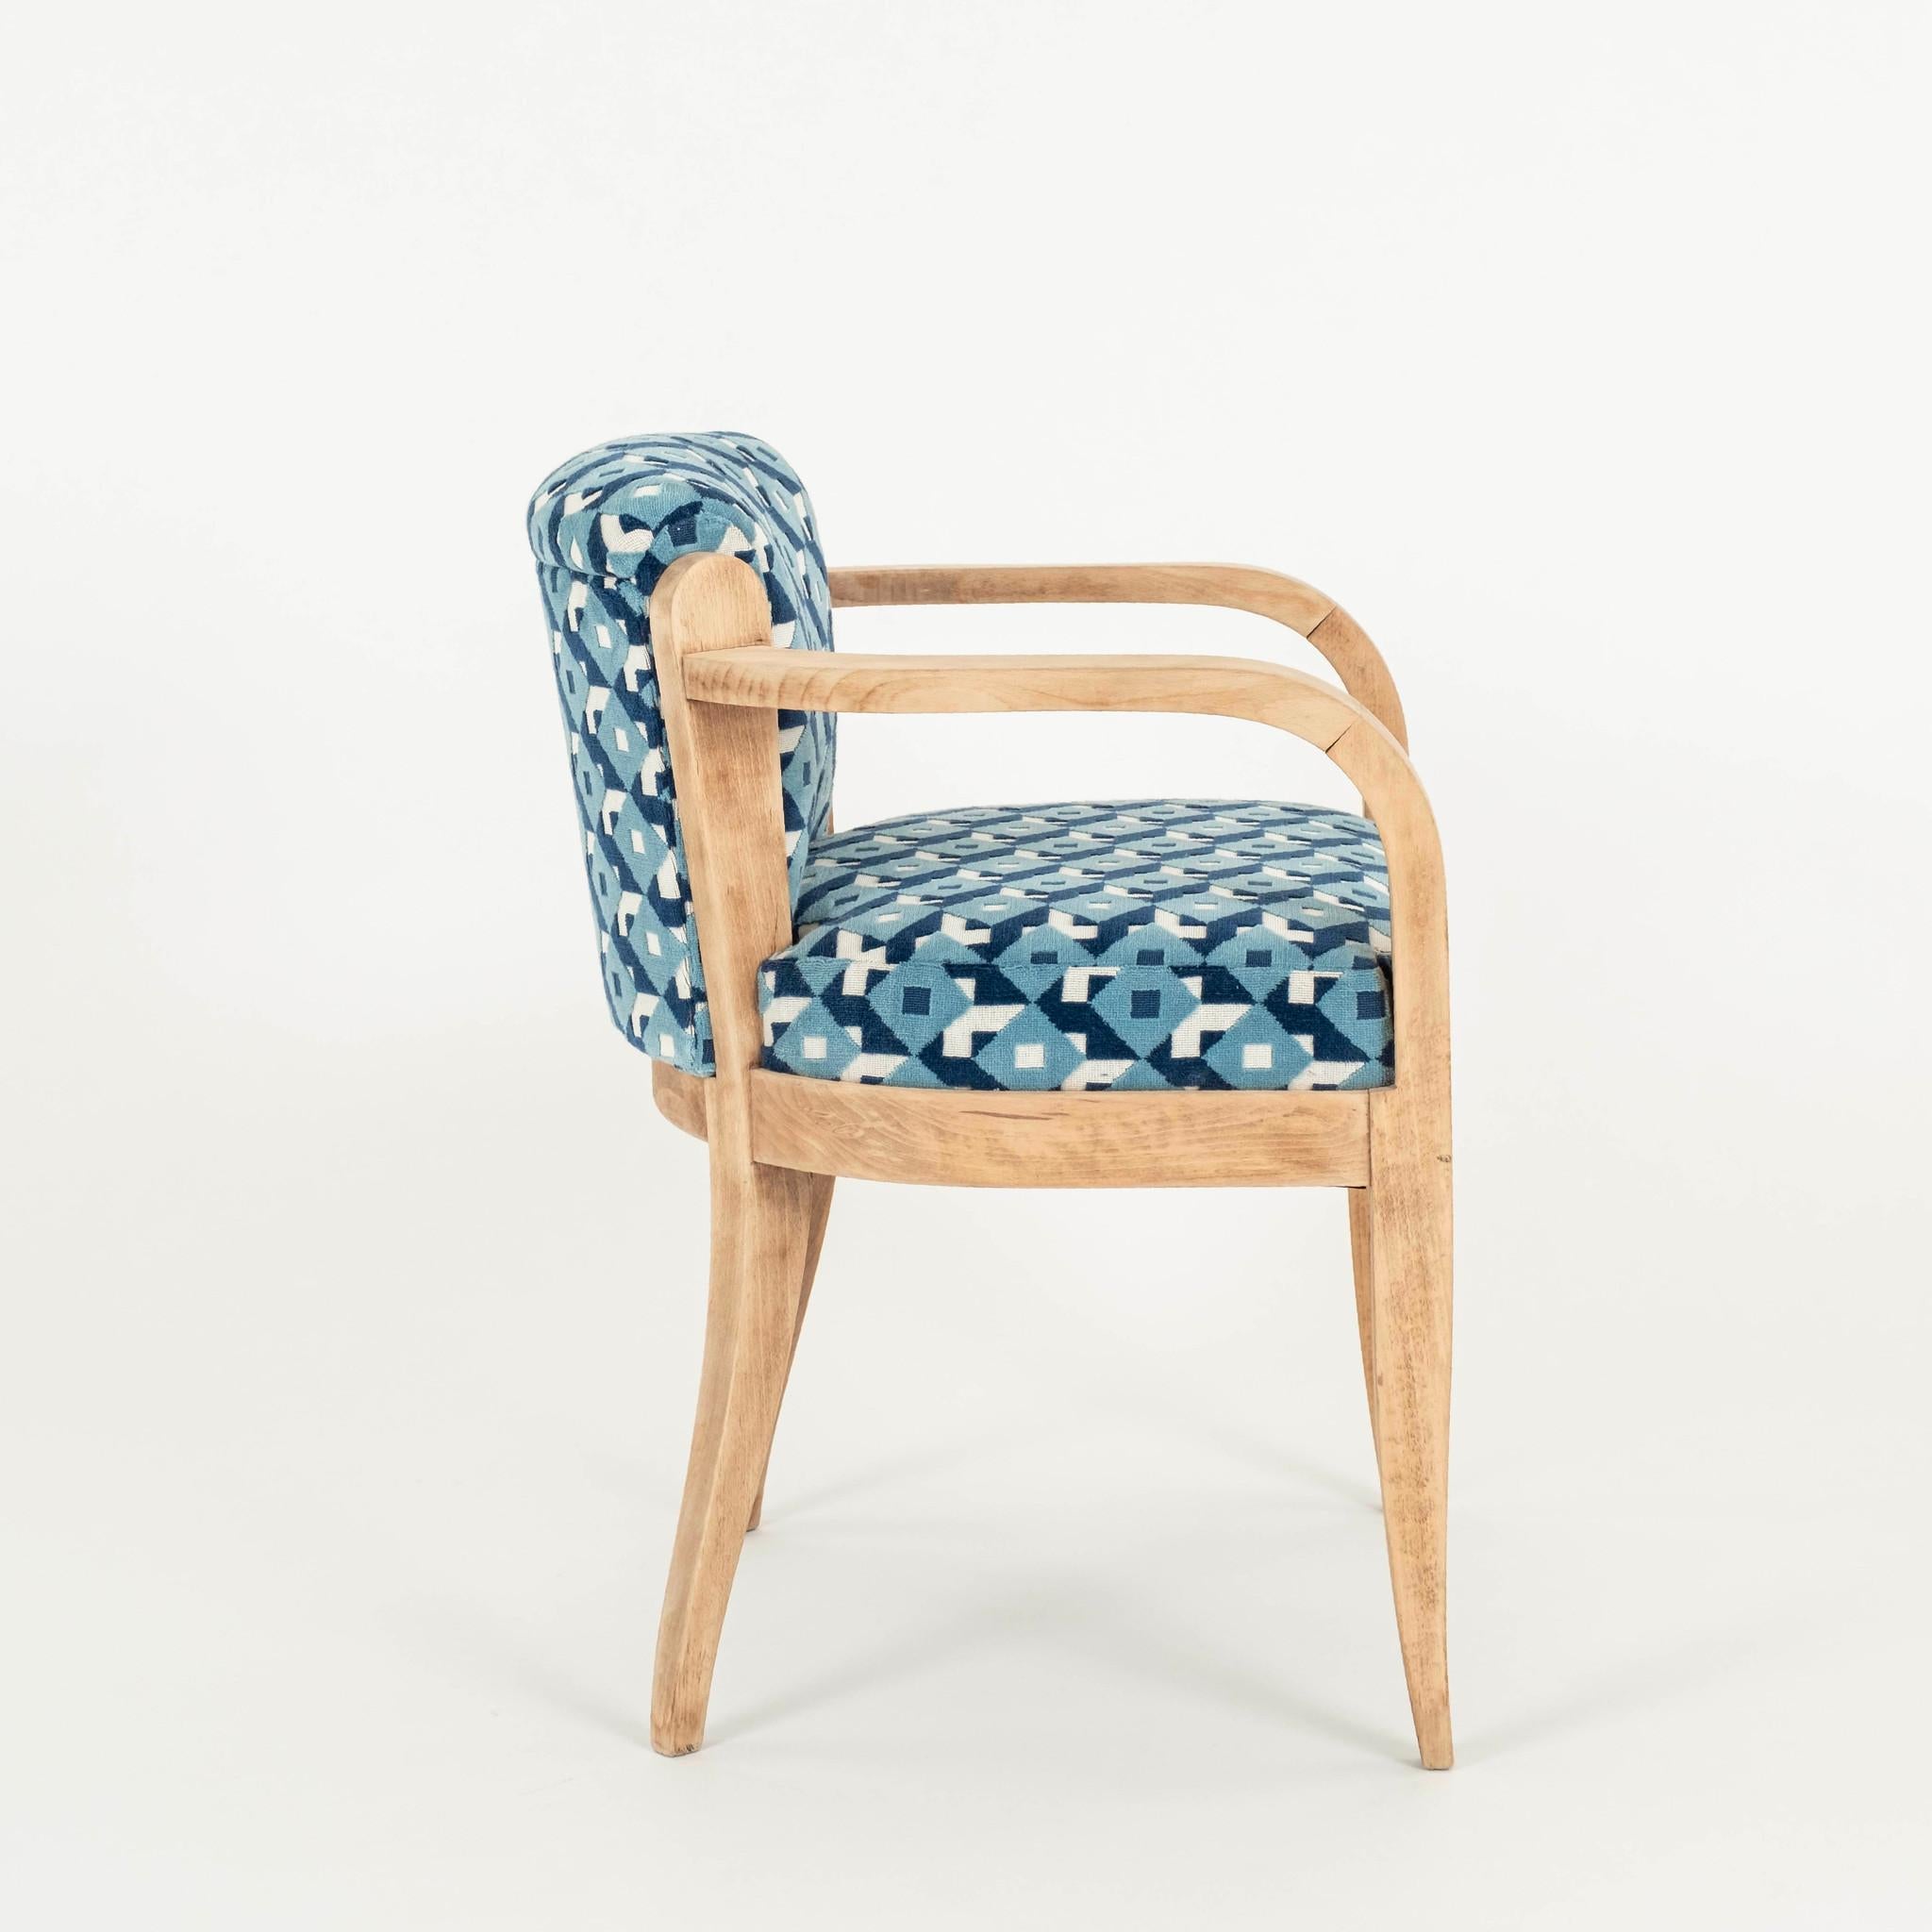 French Art Deco armchair: Blond wood with stripped back finish newly padded, upholstered in blue and white Dazzle Ship Johnson Hartig of Libertine Fabric for Schumacher. This is an all-over three-color geometric in verdant reminiscent of Op Art